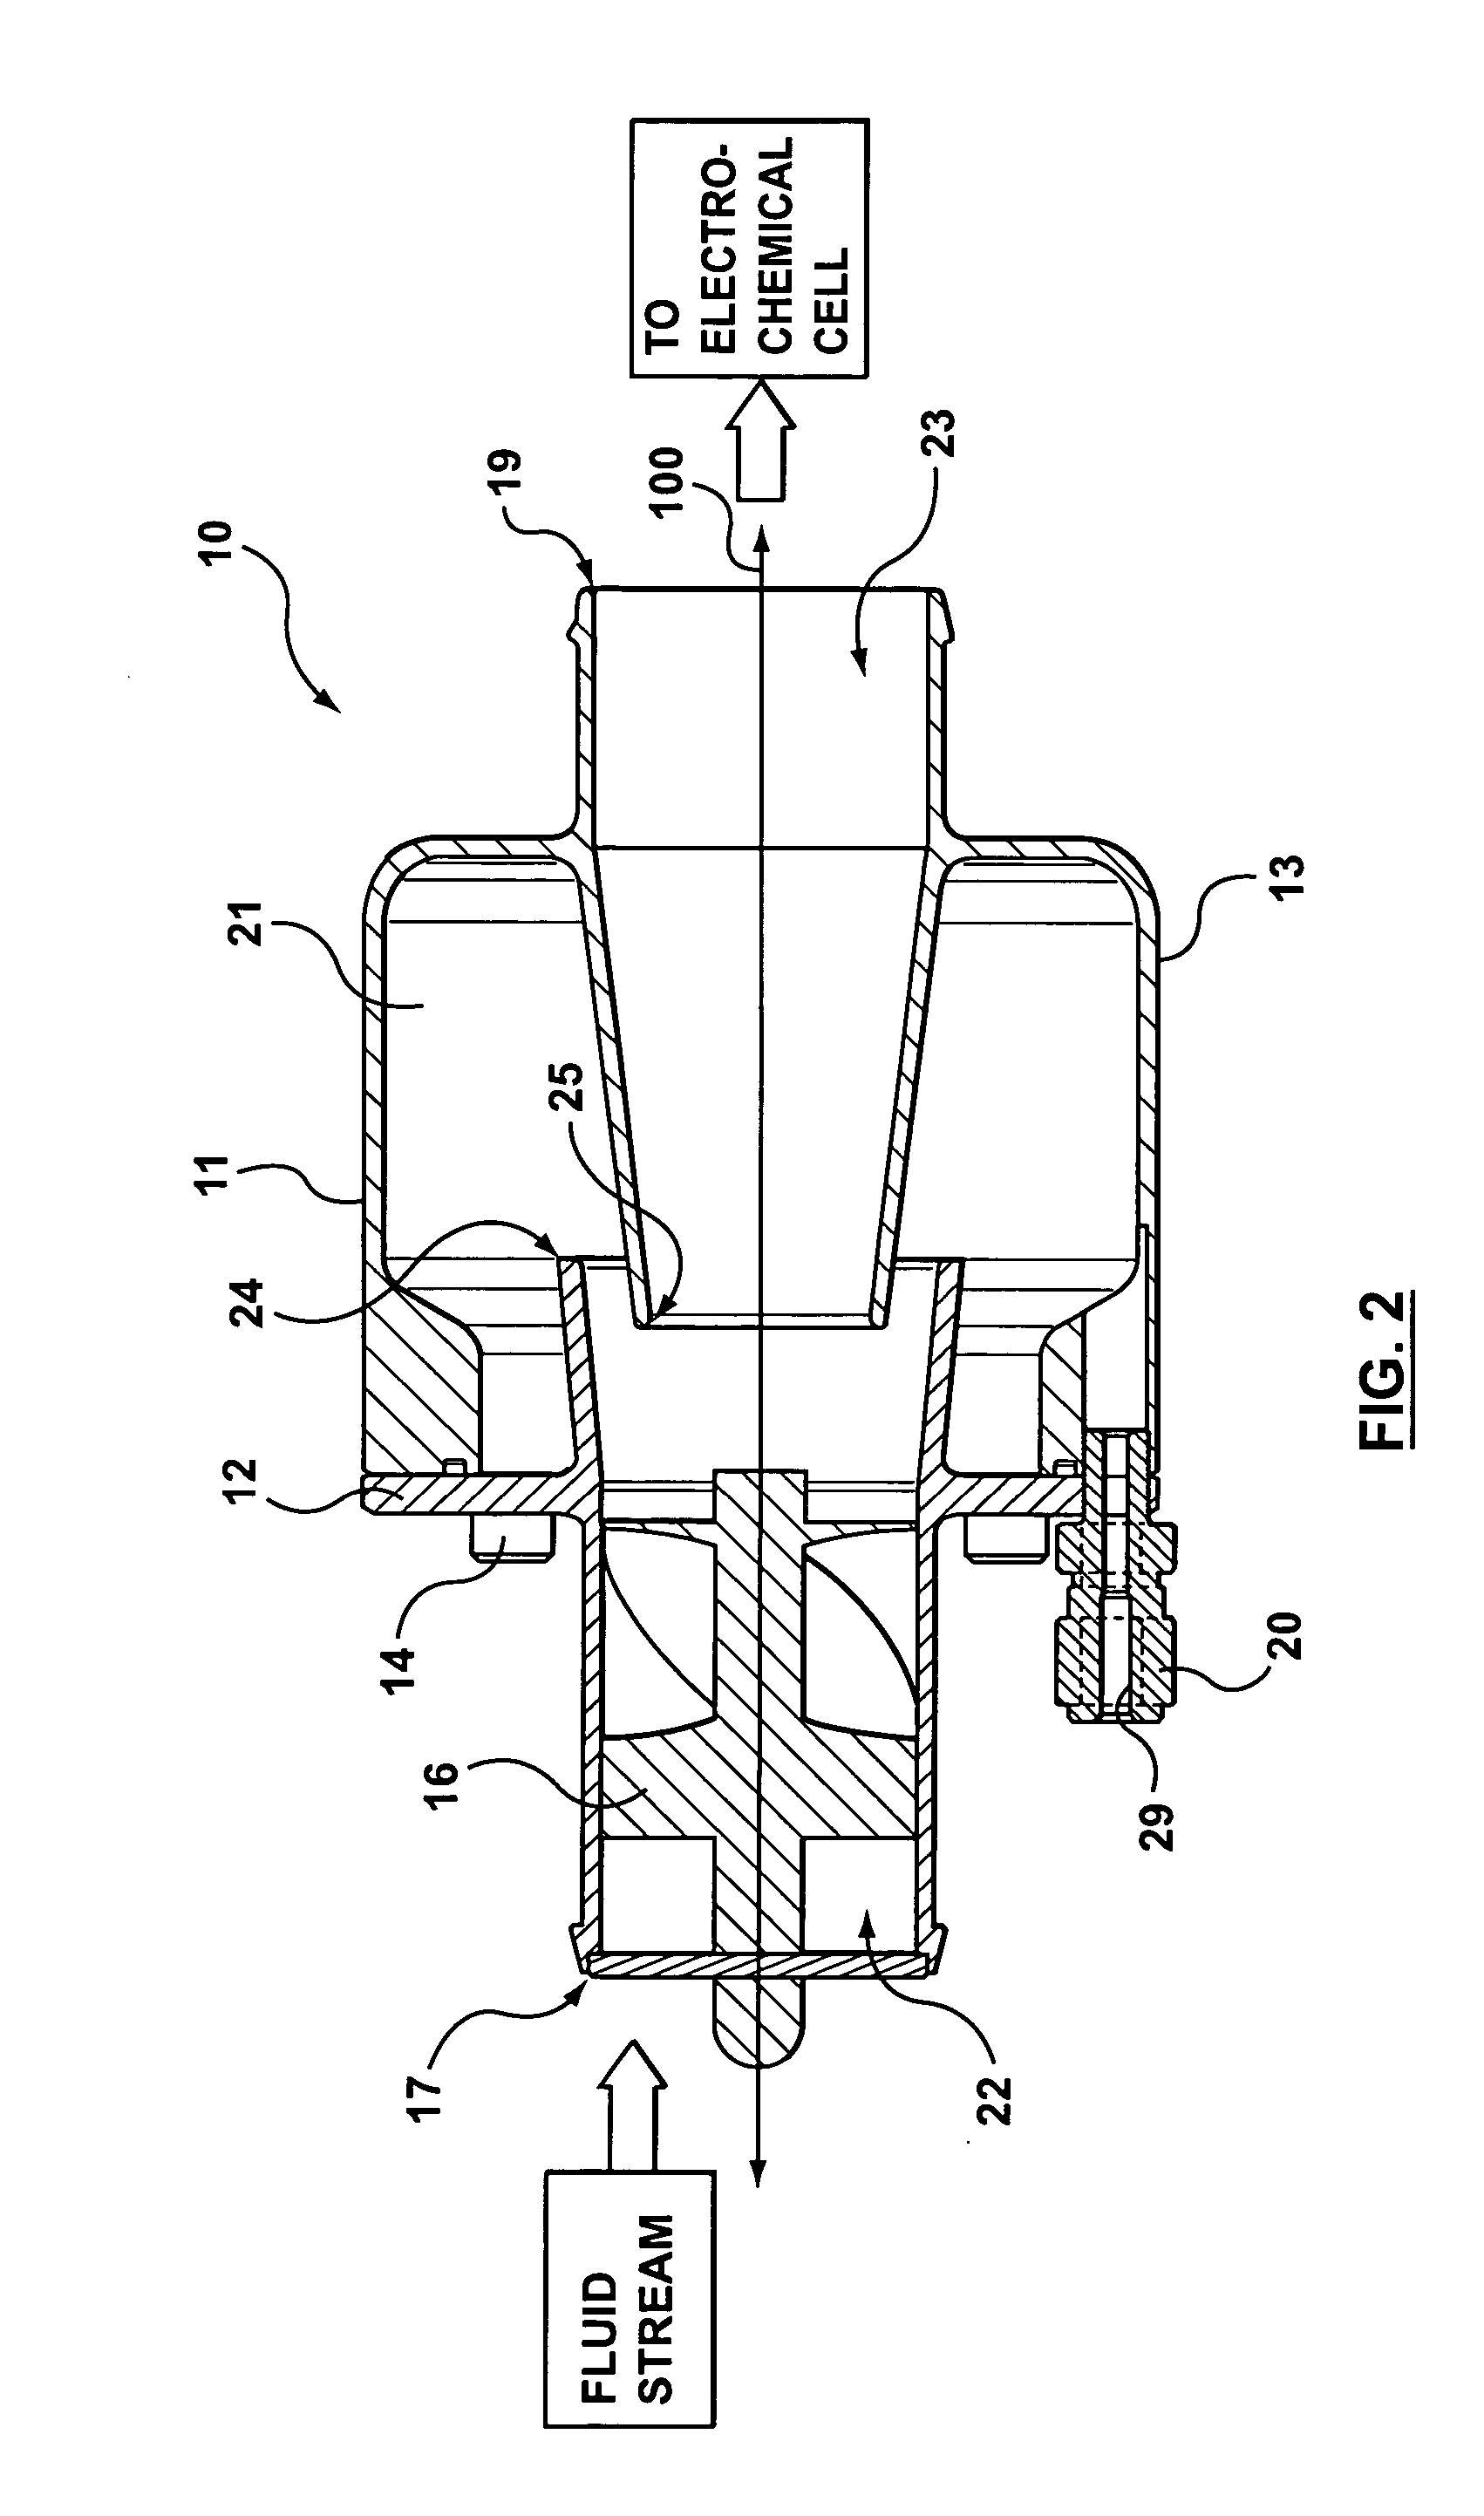 Apparatus for separating liquid from a process gas stream of an electrochemical cell stack